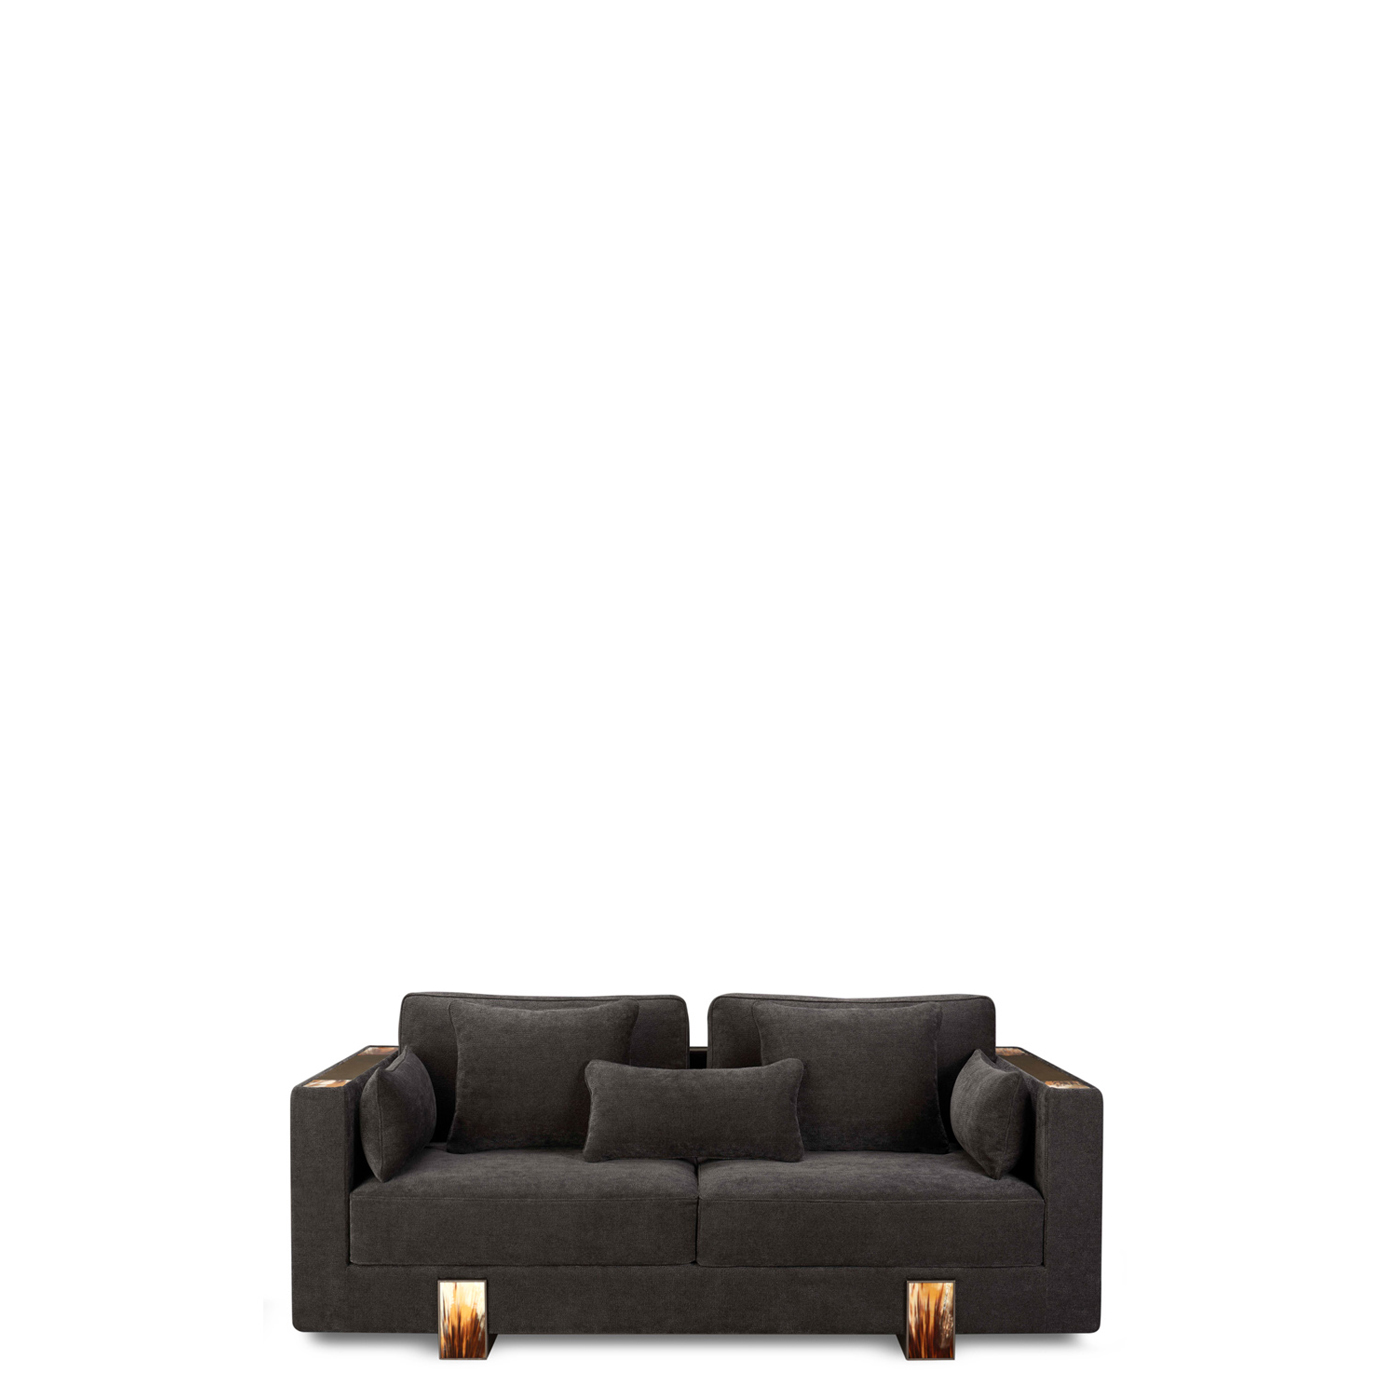 Sofas and seats - Adriano sofa in sub bear fabric with horn details mod. 6037B - Arcahorn